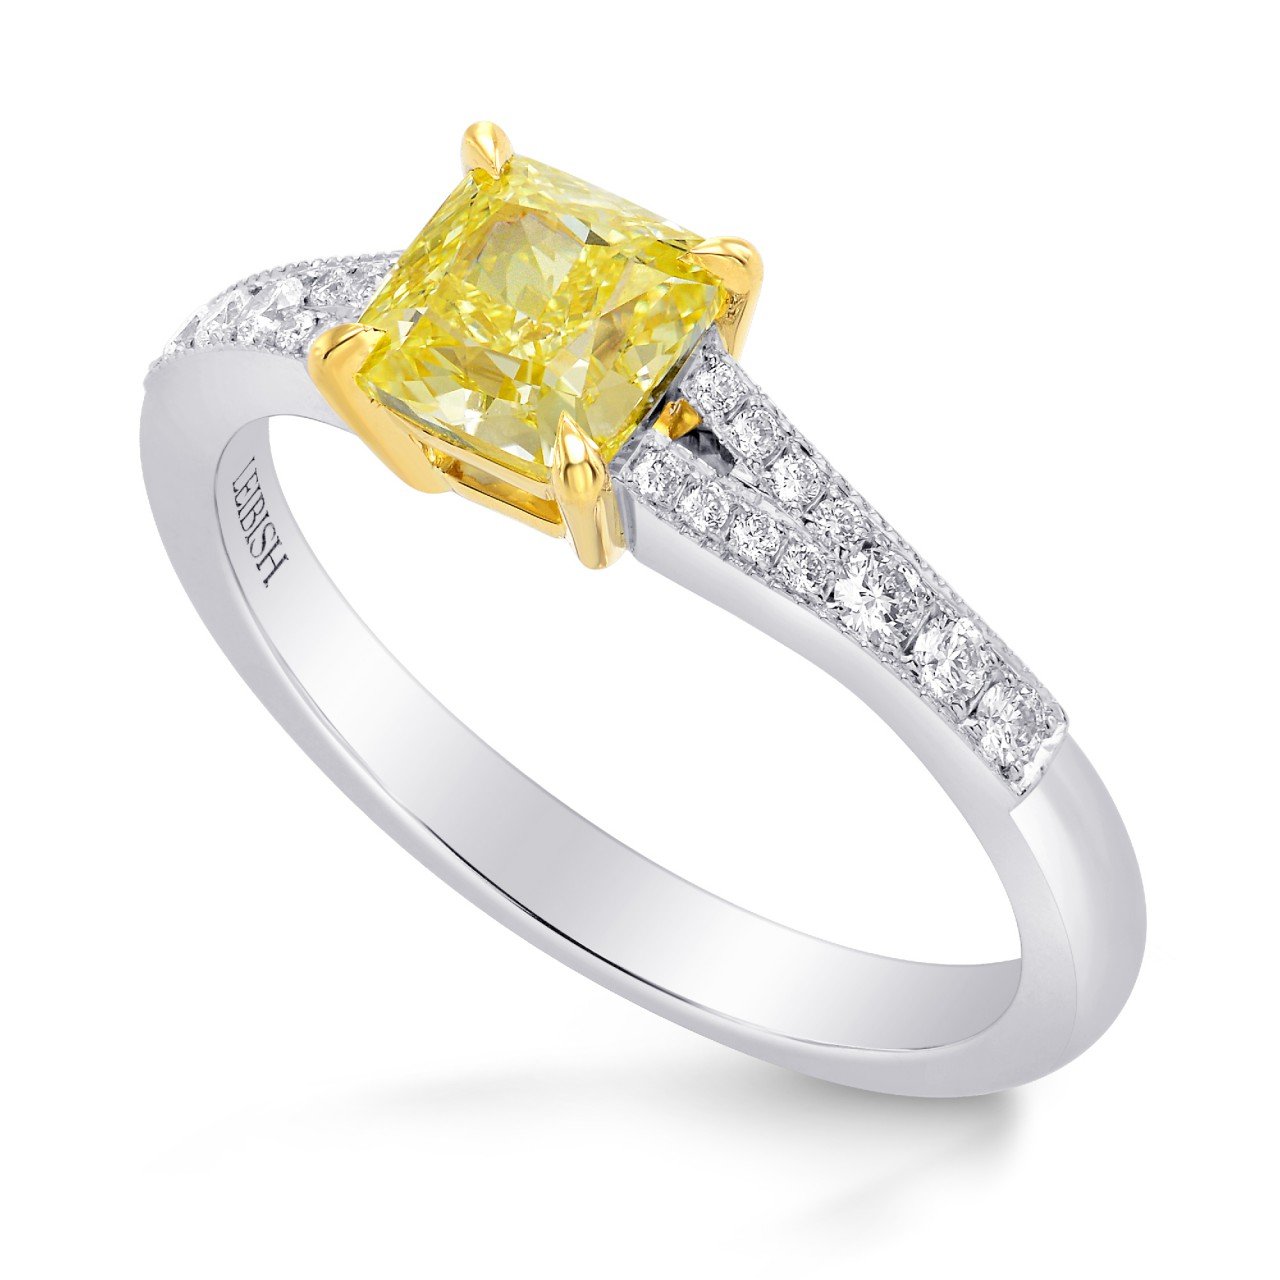 Leibish & co 1.18Cts Yellow Diamond Engagement Side Stone Ring Set in 18K White Yellow Gold Engagement Natural Loose Stone Gift For Her Anniversary Real Wedding Birthday